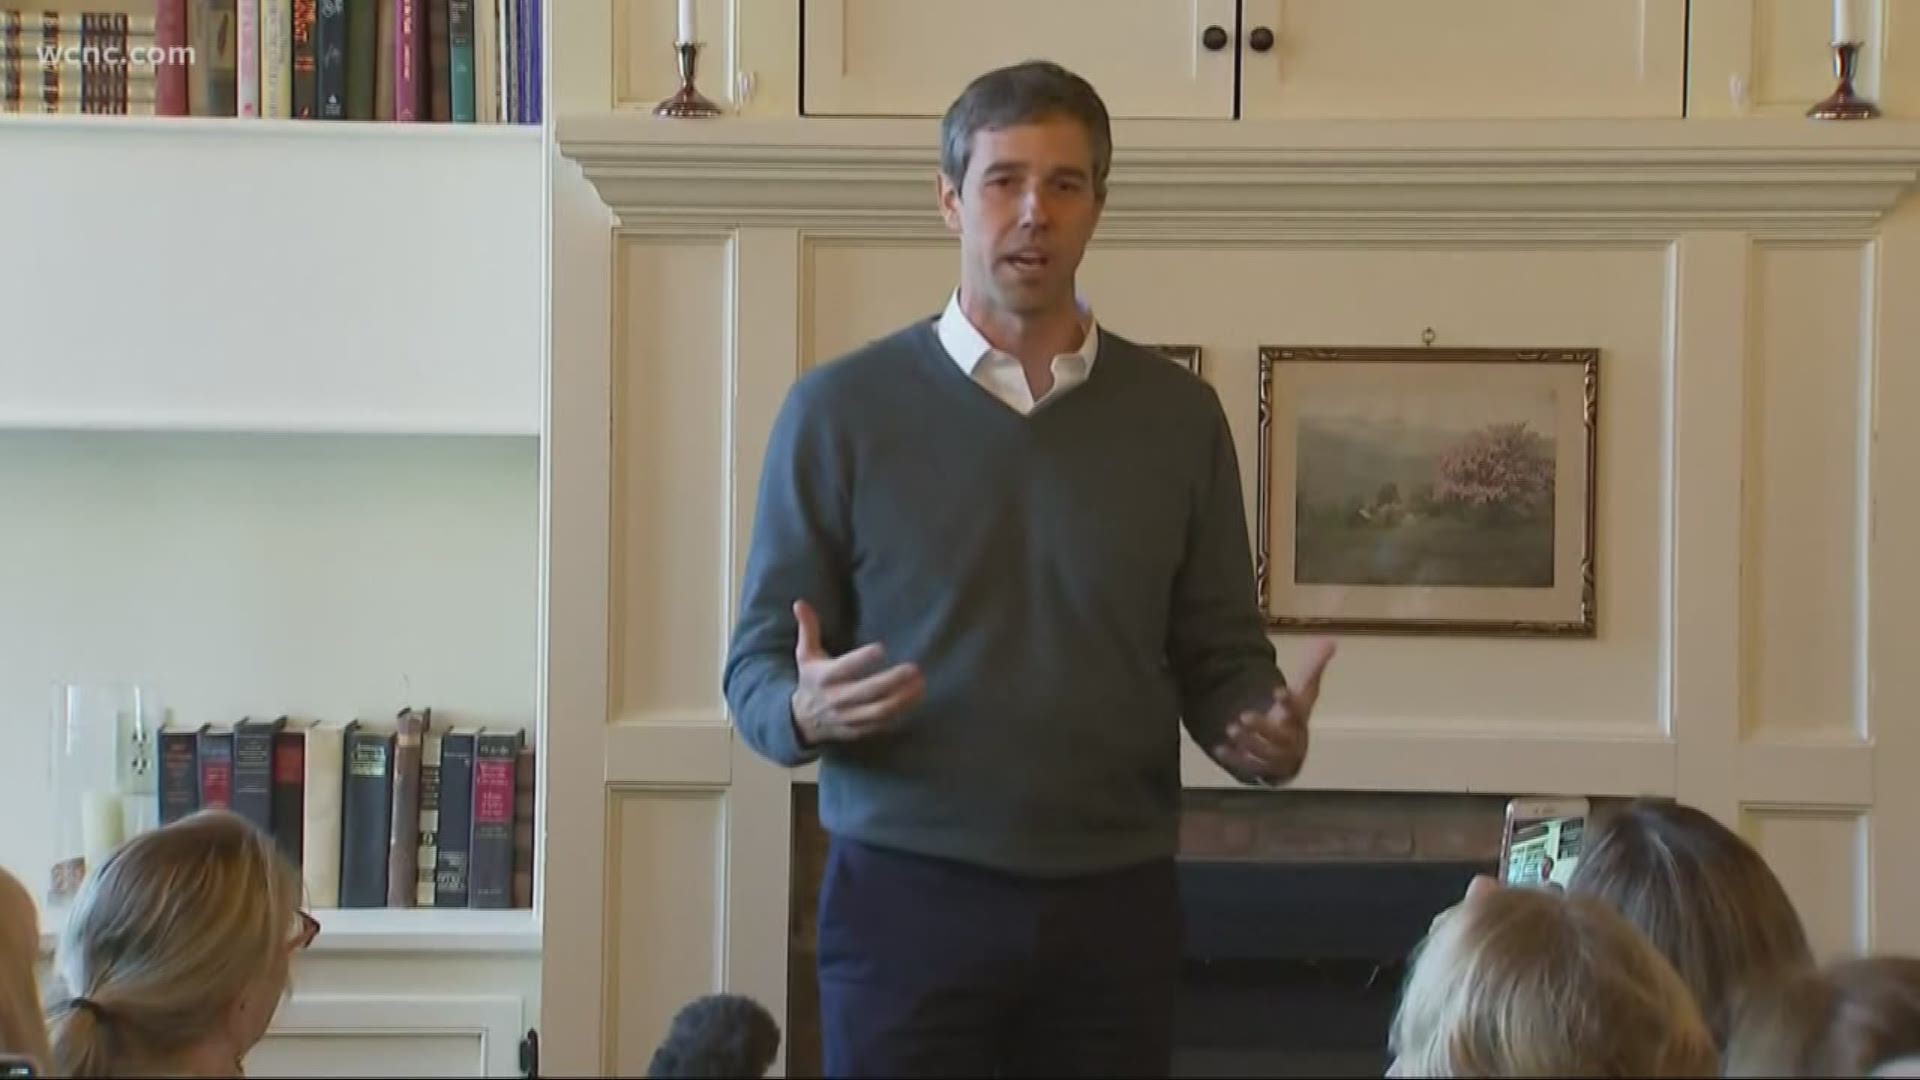 Democratic presidential candidate Beto O'Rourke will make his first-ever campaign visit to South Carolina when he makes a stop in Rock Hill Friday.